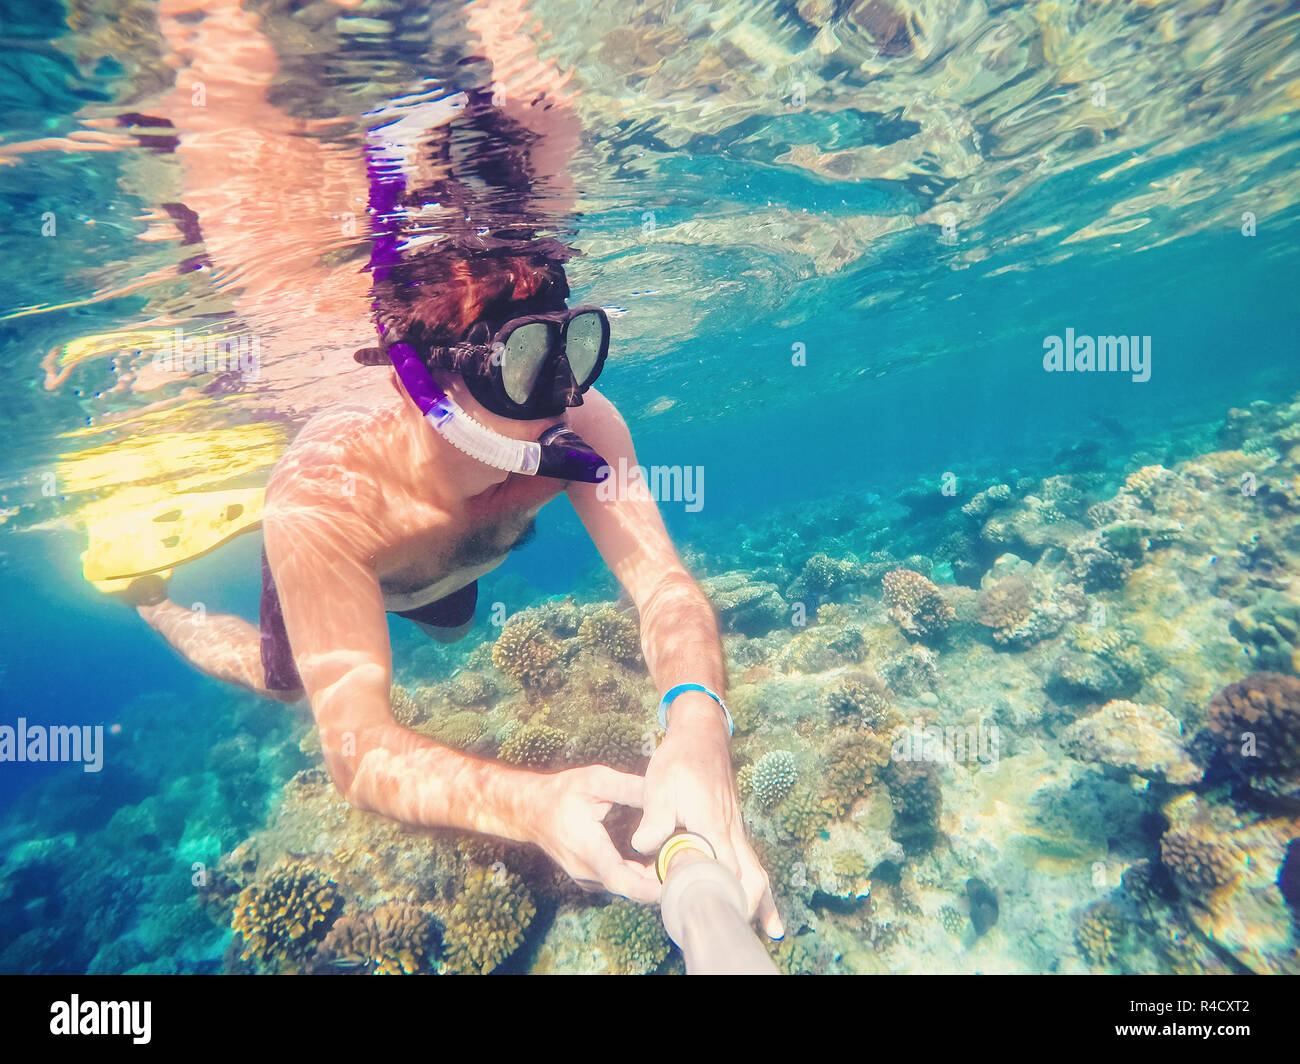 Snorkel swims in shallow water, Red Sea, Egypt Stock Photo